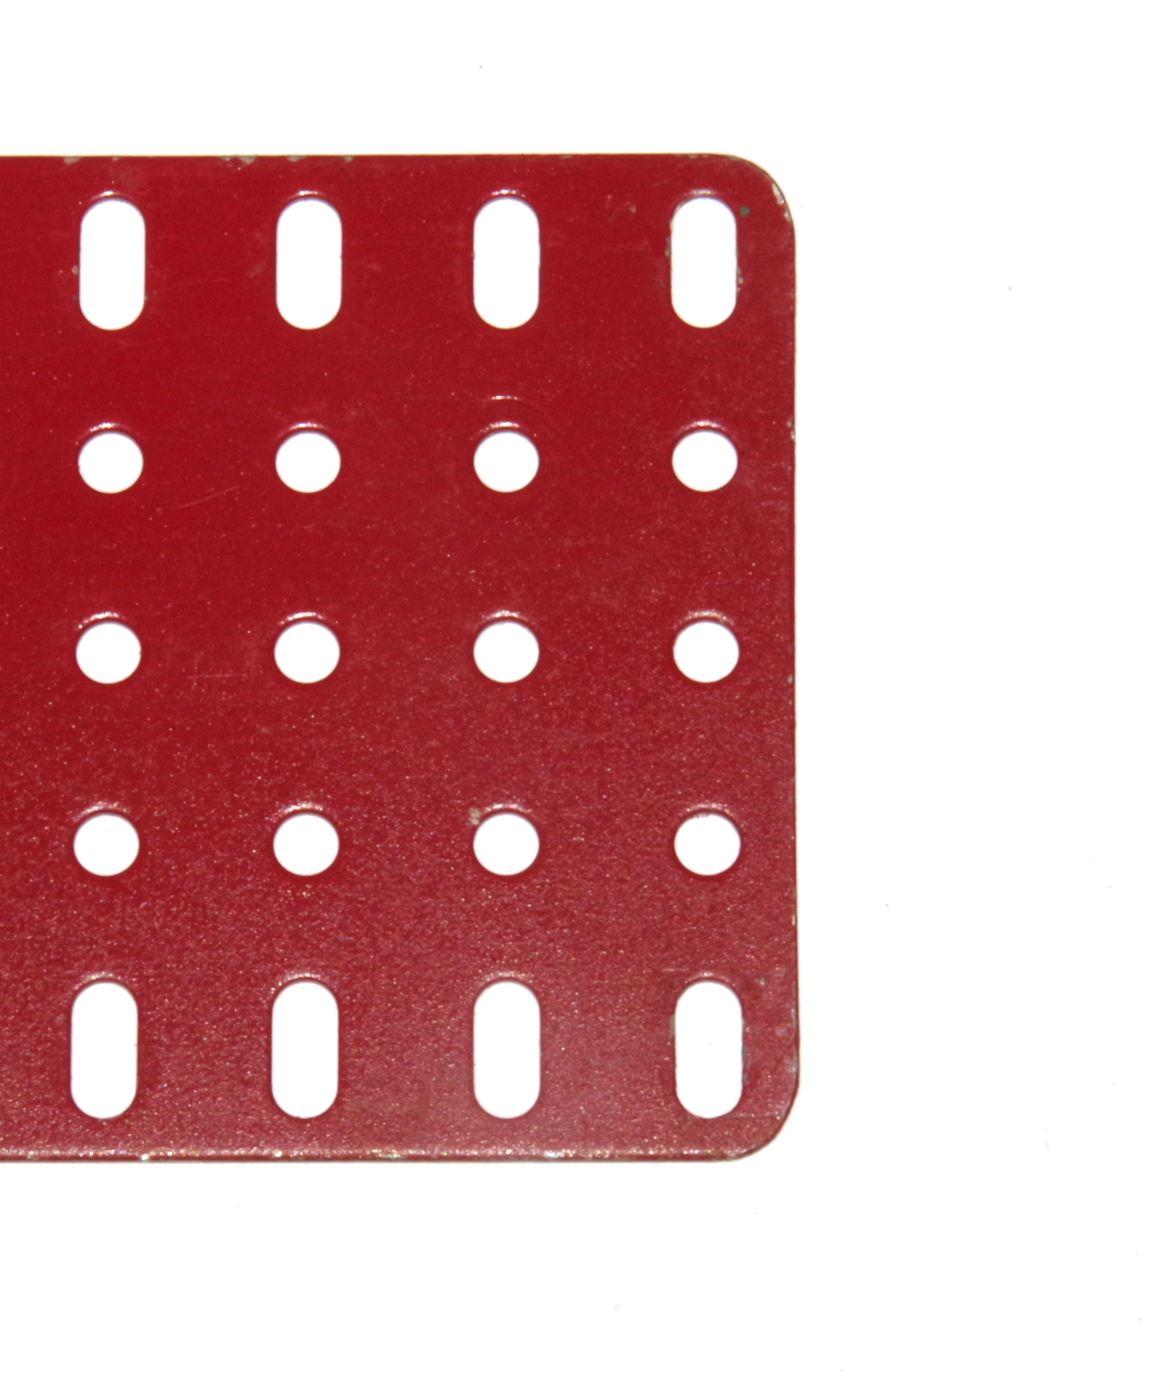 75c Flat Plate 5x25 Hole Red Used